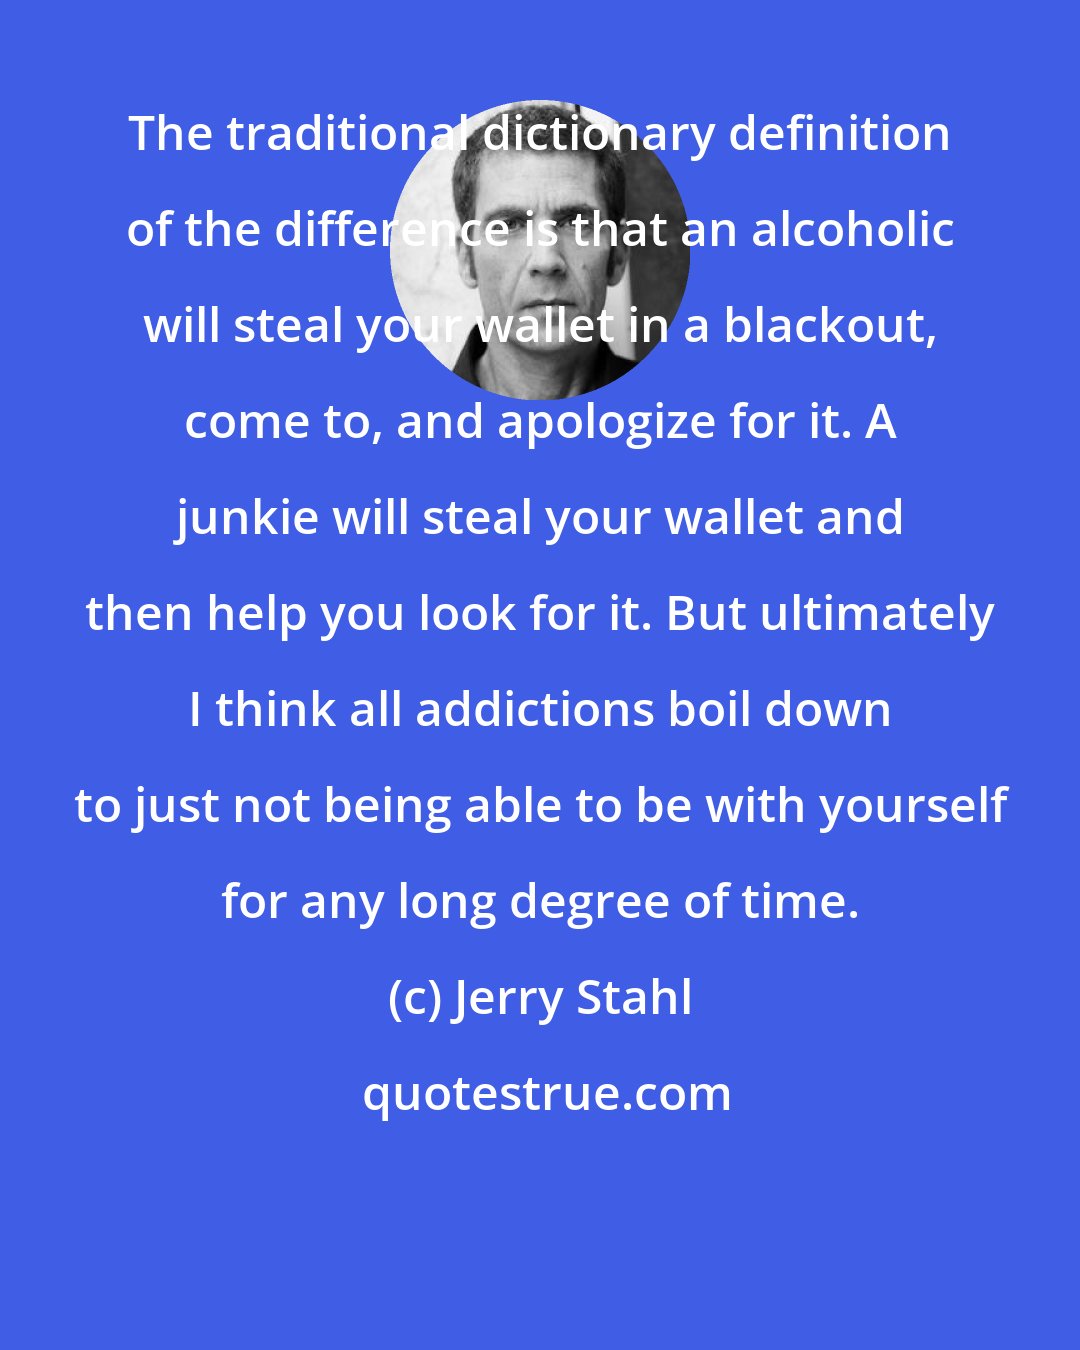 Jerry Stahl: The traditional dictionary definition of the difference is that an alcoholic will steal your wallet in a blackout, come to, and apologize for it. A junkie will steal your wallet and then help you look for it. But ultimately I think all addictions boil down to just not being able to be with yourself for any long degree of time.